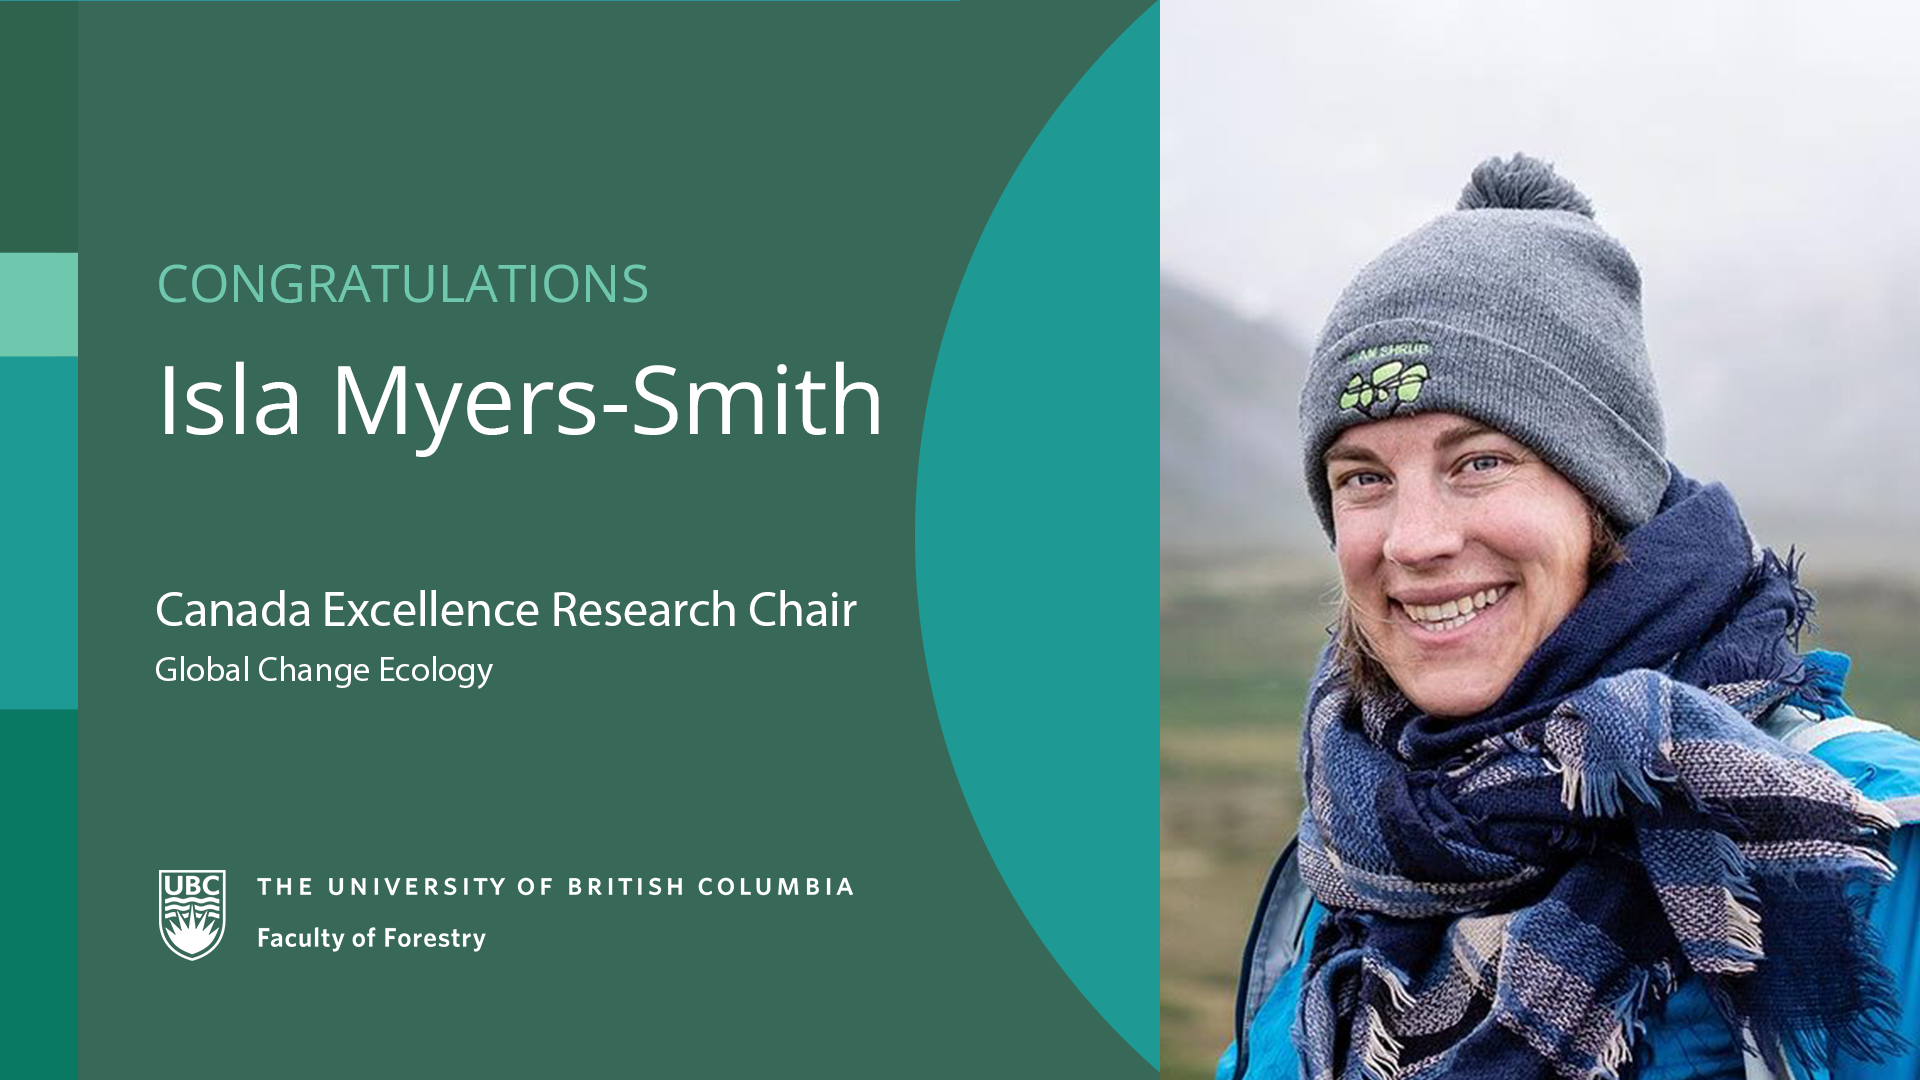 Congratulations Isla Myers-Smith; Canada Excellence Research Chair, Global Change Ecology